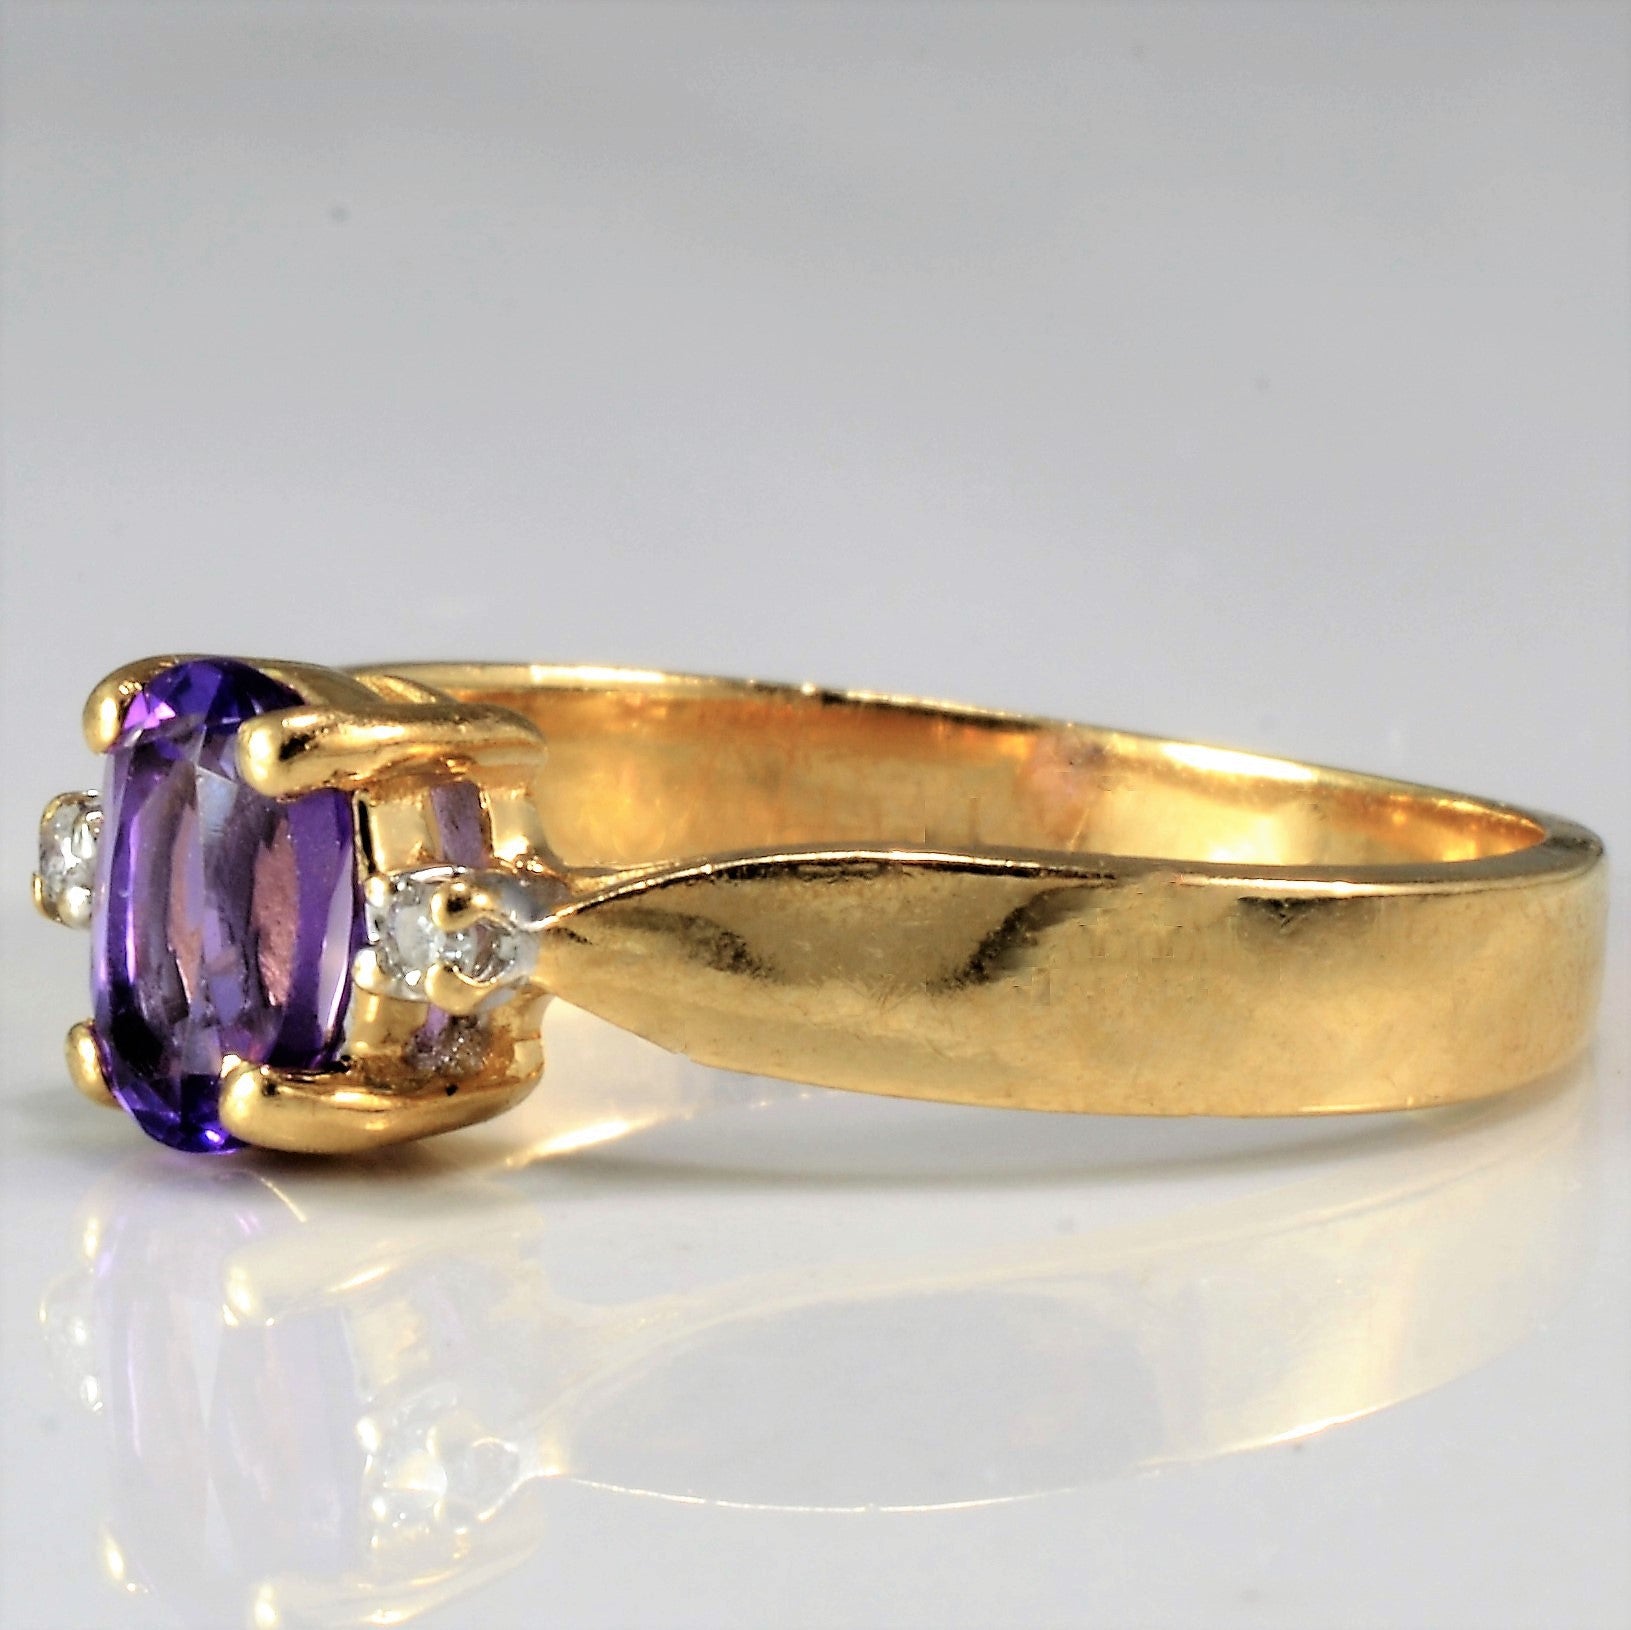 Tapered Oval Cut Amethyst Ring | 0.02 ctw, SZ 5.75 |